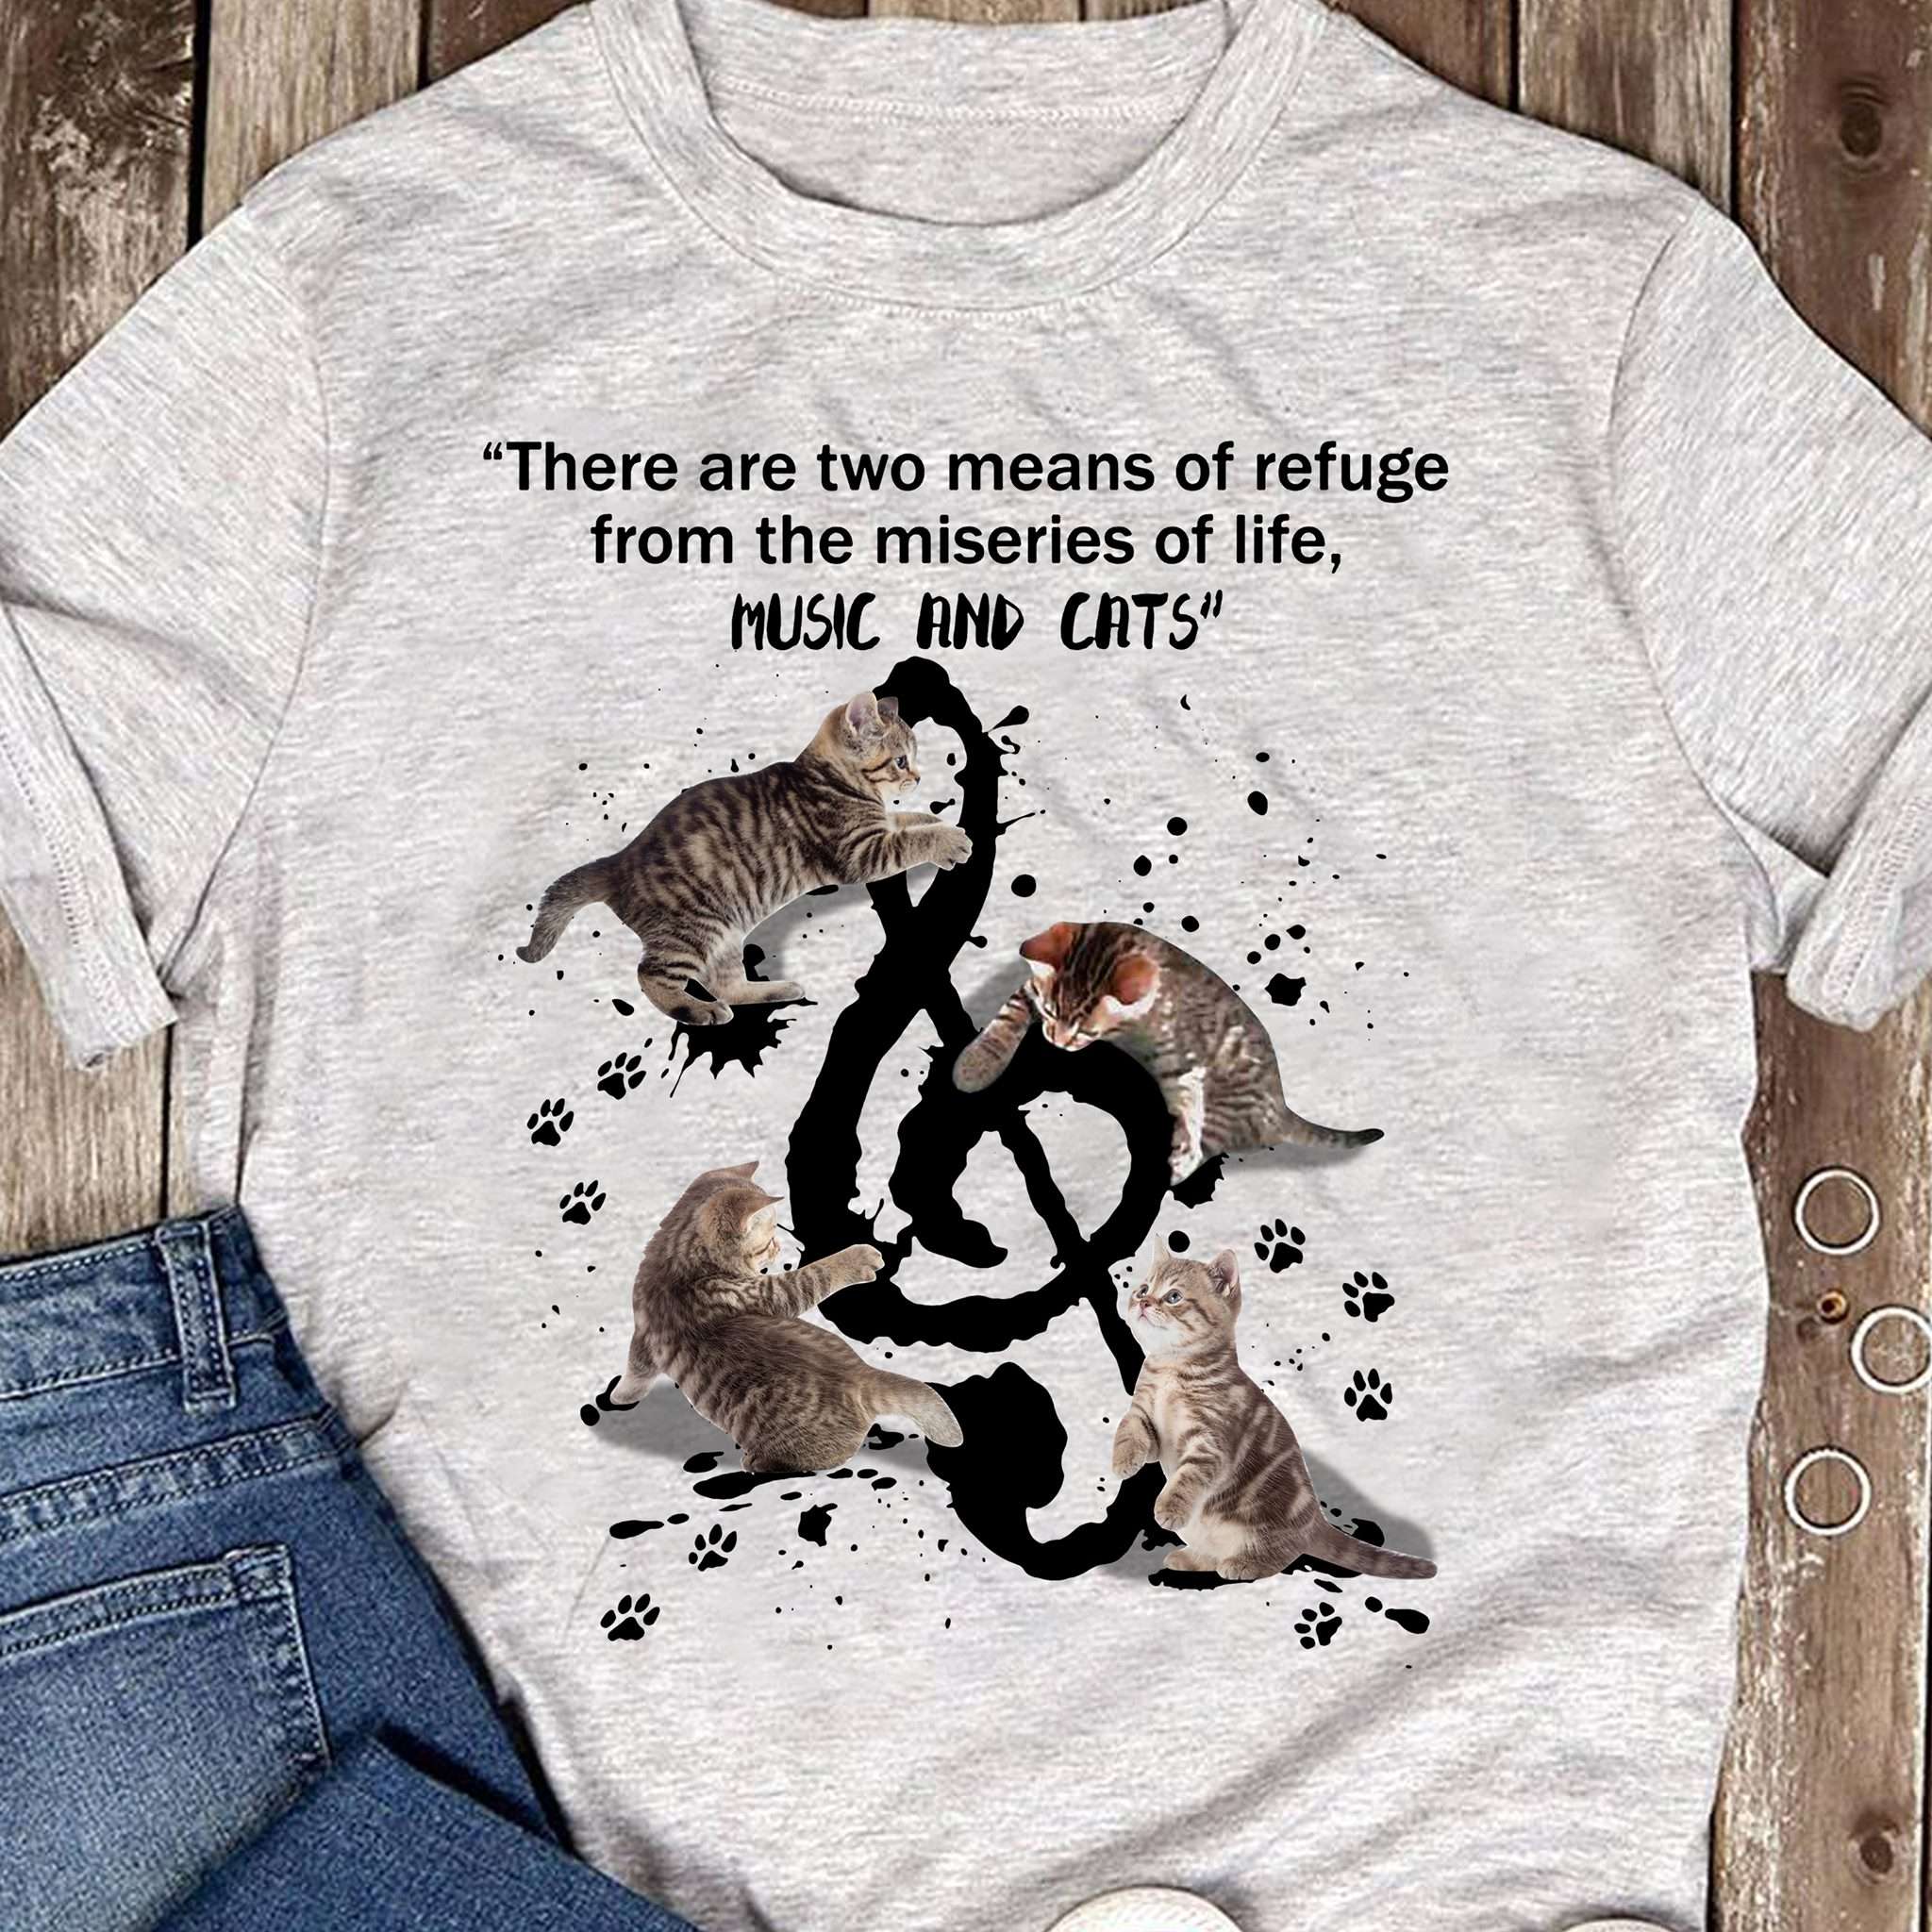 Music Note And Cat - There are two means of refuge from the miseries of ...